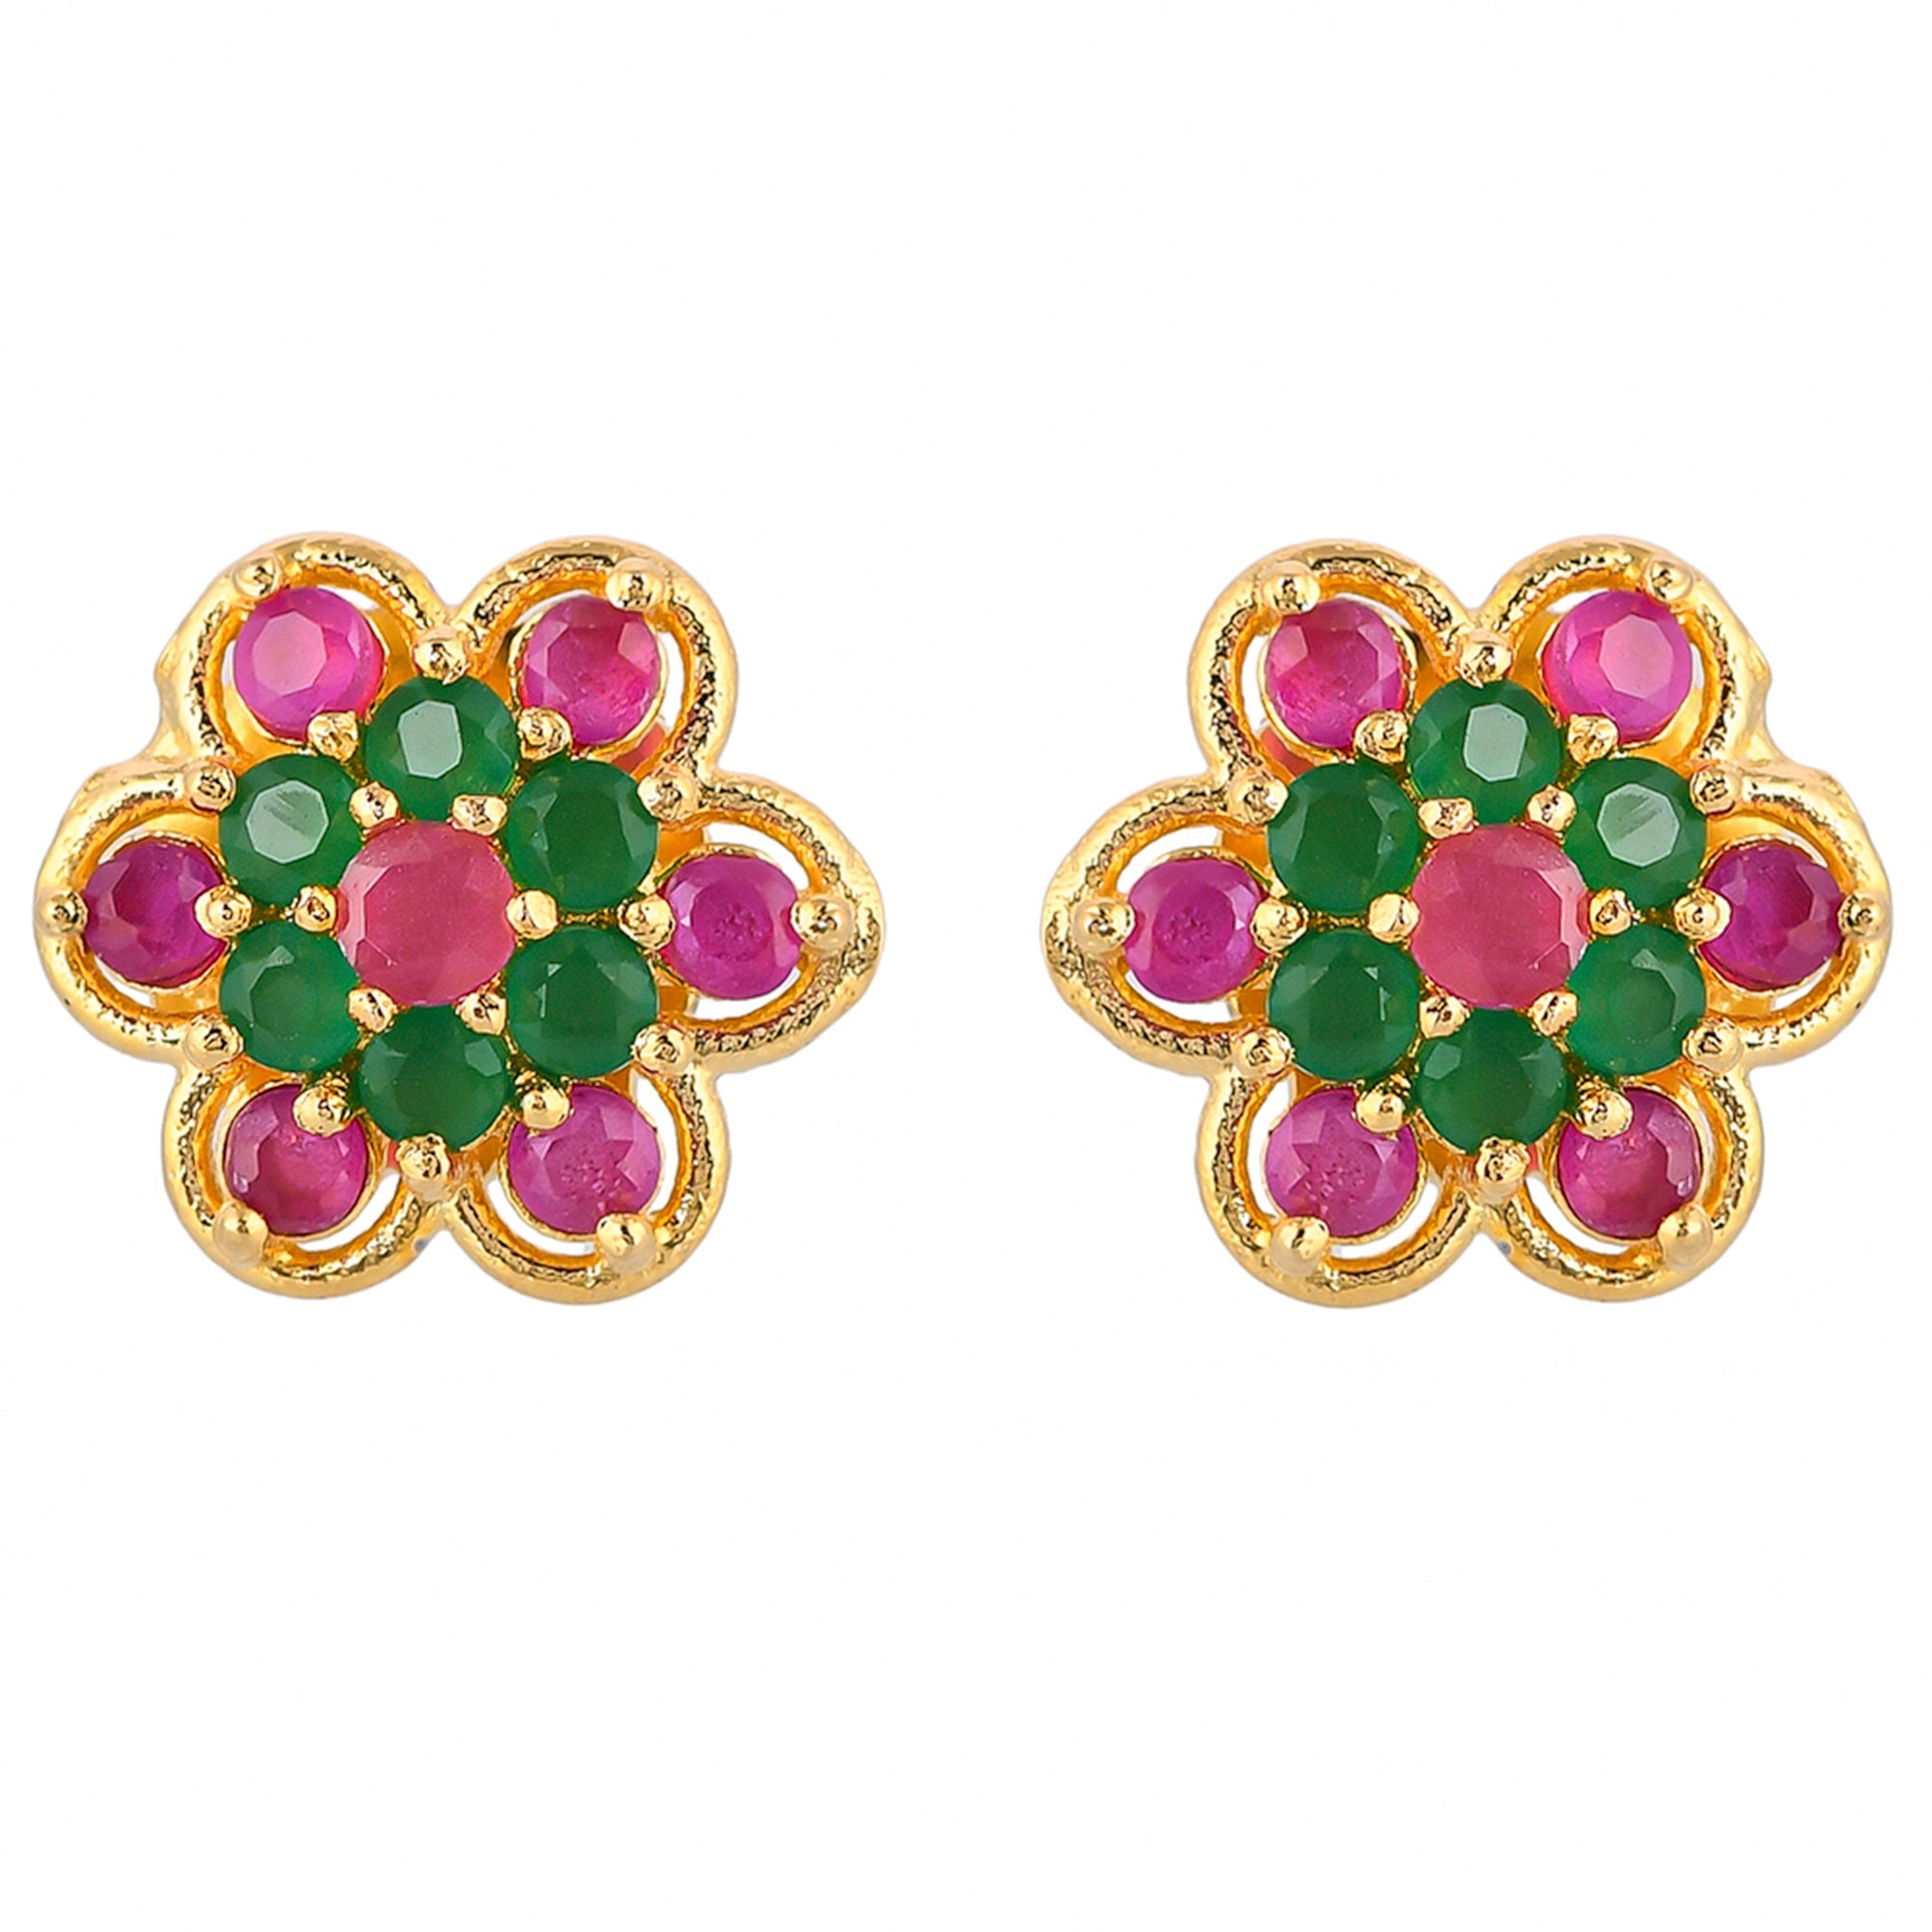 Women's Floral Pink And Green Cz Stud Earrings - Voylla